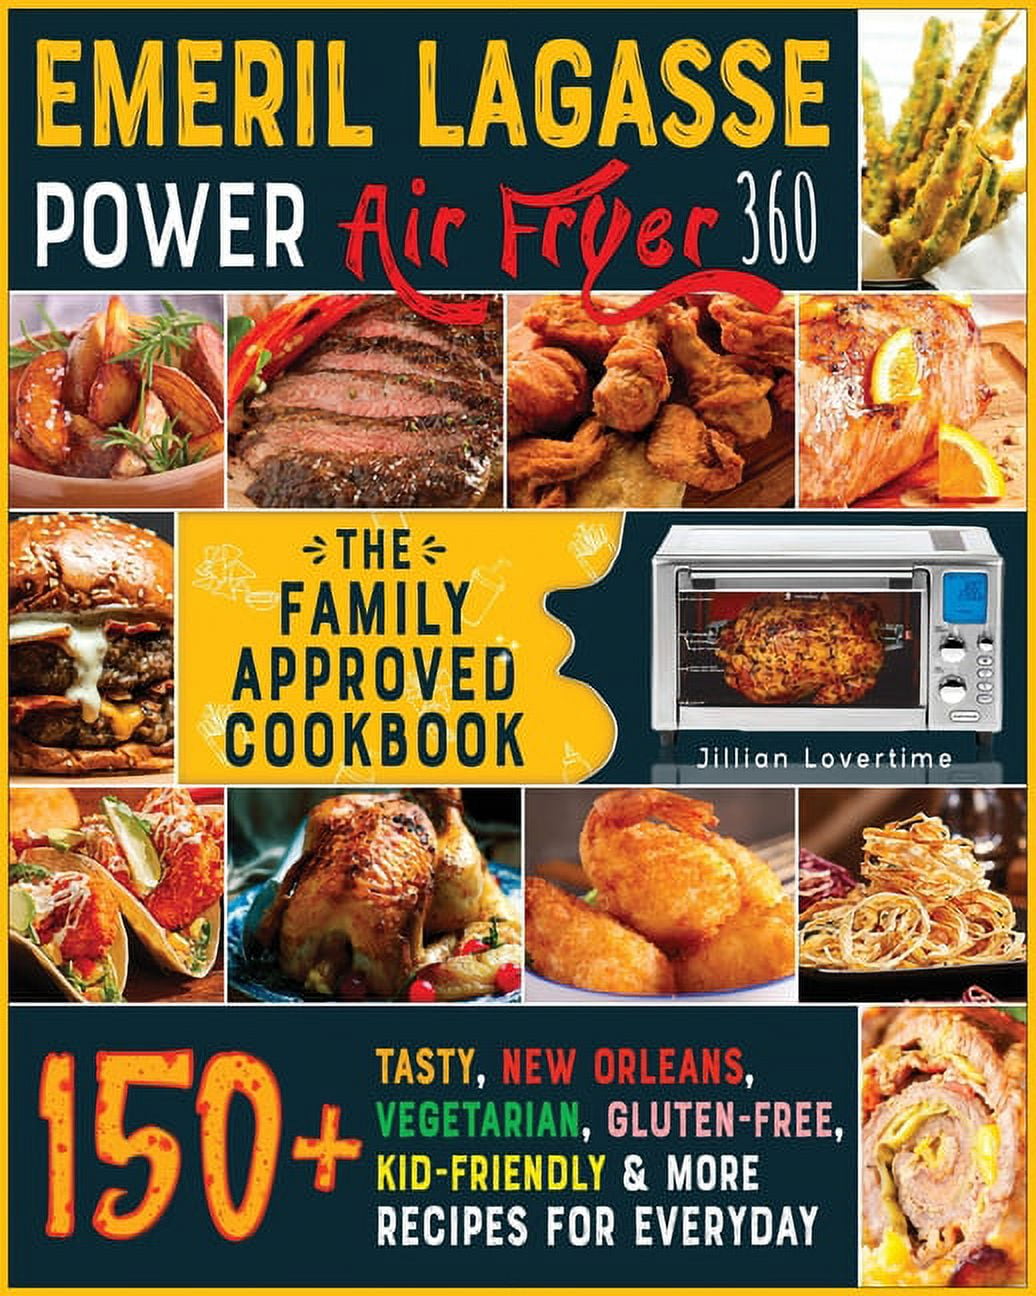 The Ultimate Emeril Lagasse Power AirFryer 360 Plus Cookbook 2021: The Most  Comprehensive Guide to Mastering Your Multicooker. Steaming, Air Frying